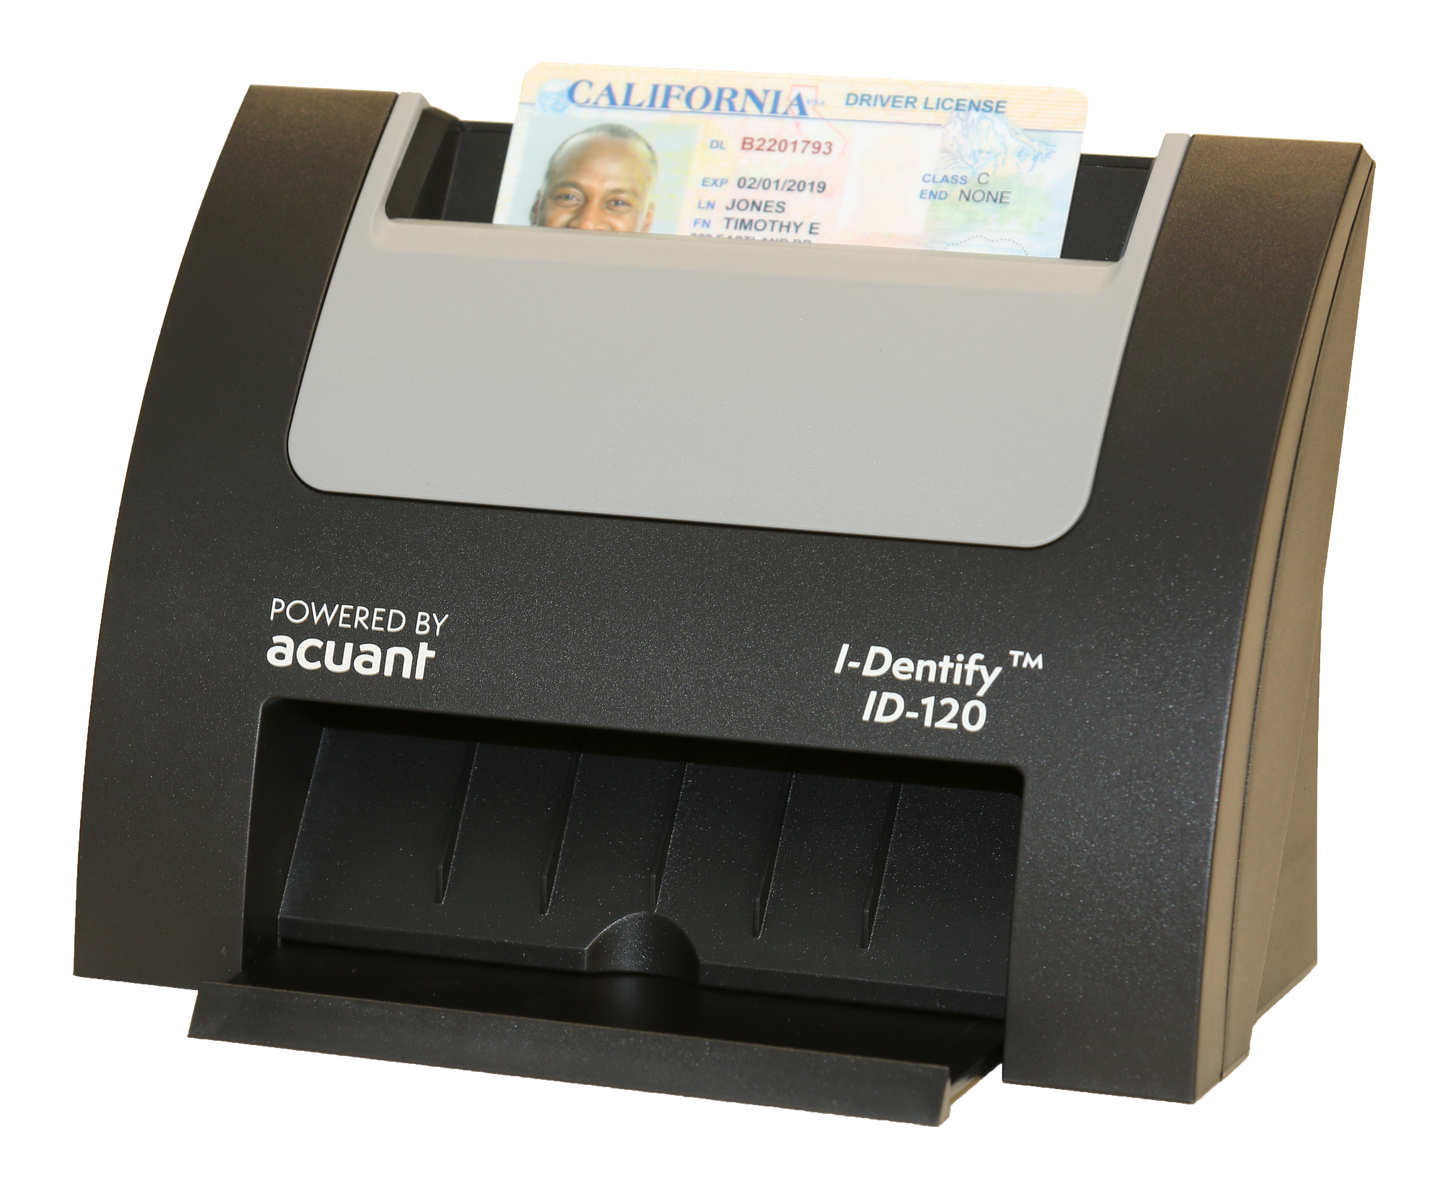 I-Dentify™ ID-120 Double Sided Card Authentication Scanner